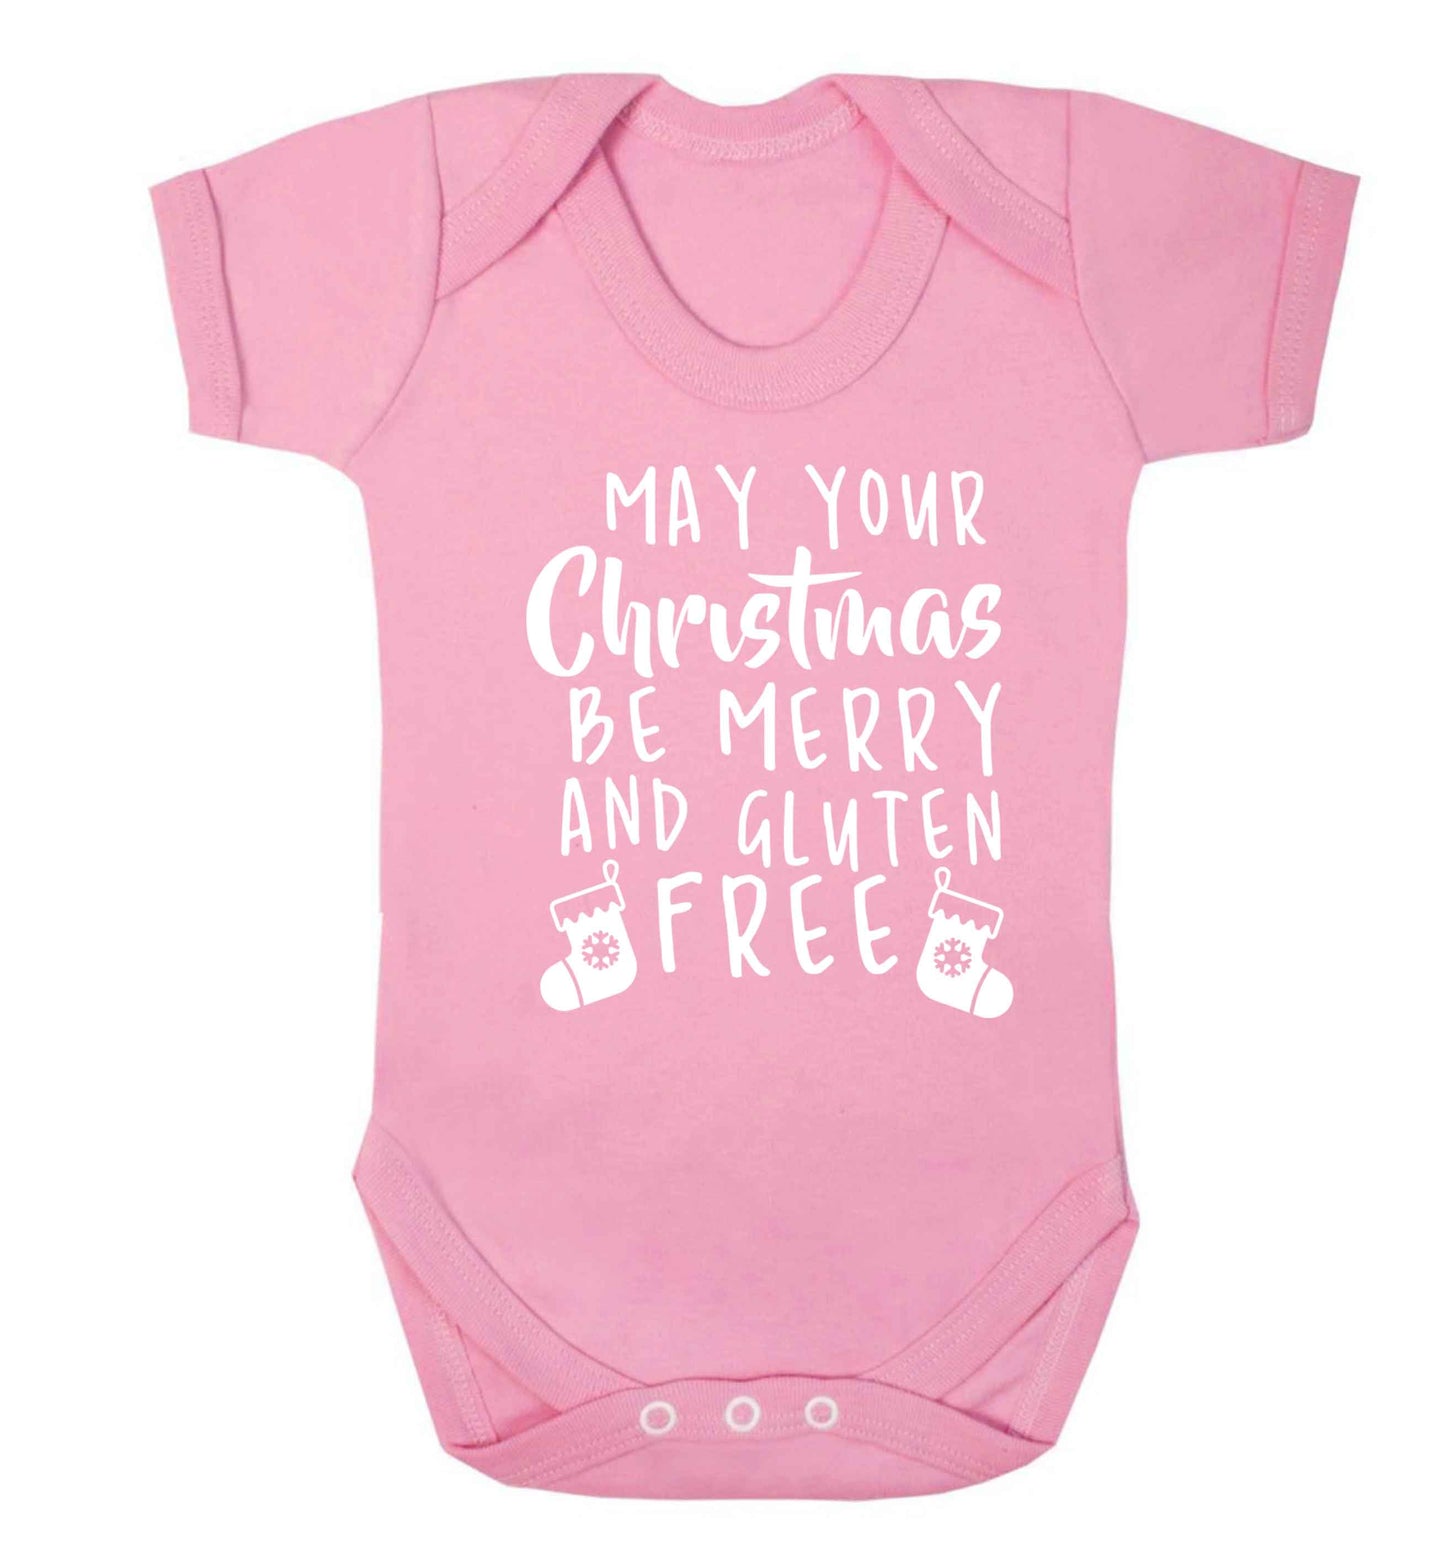 May your Christmas be merry and gluten free Baby Vest pale pink 18-24 months